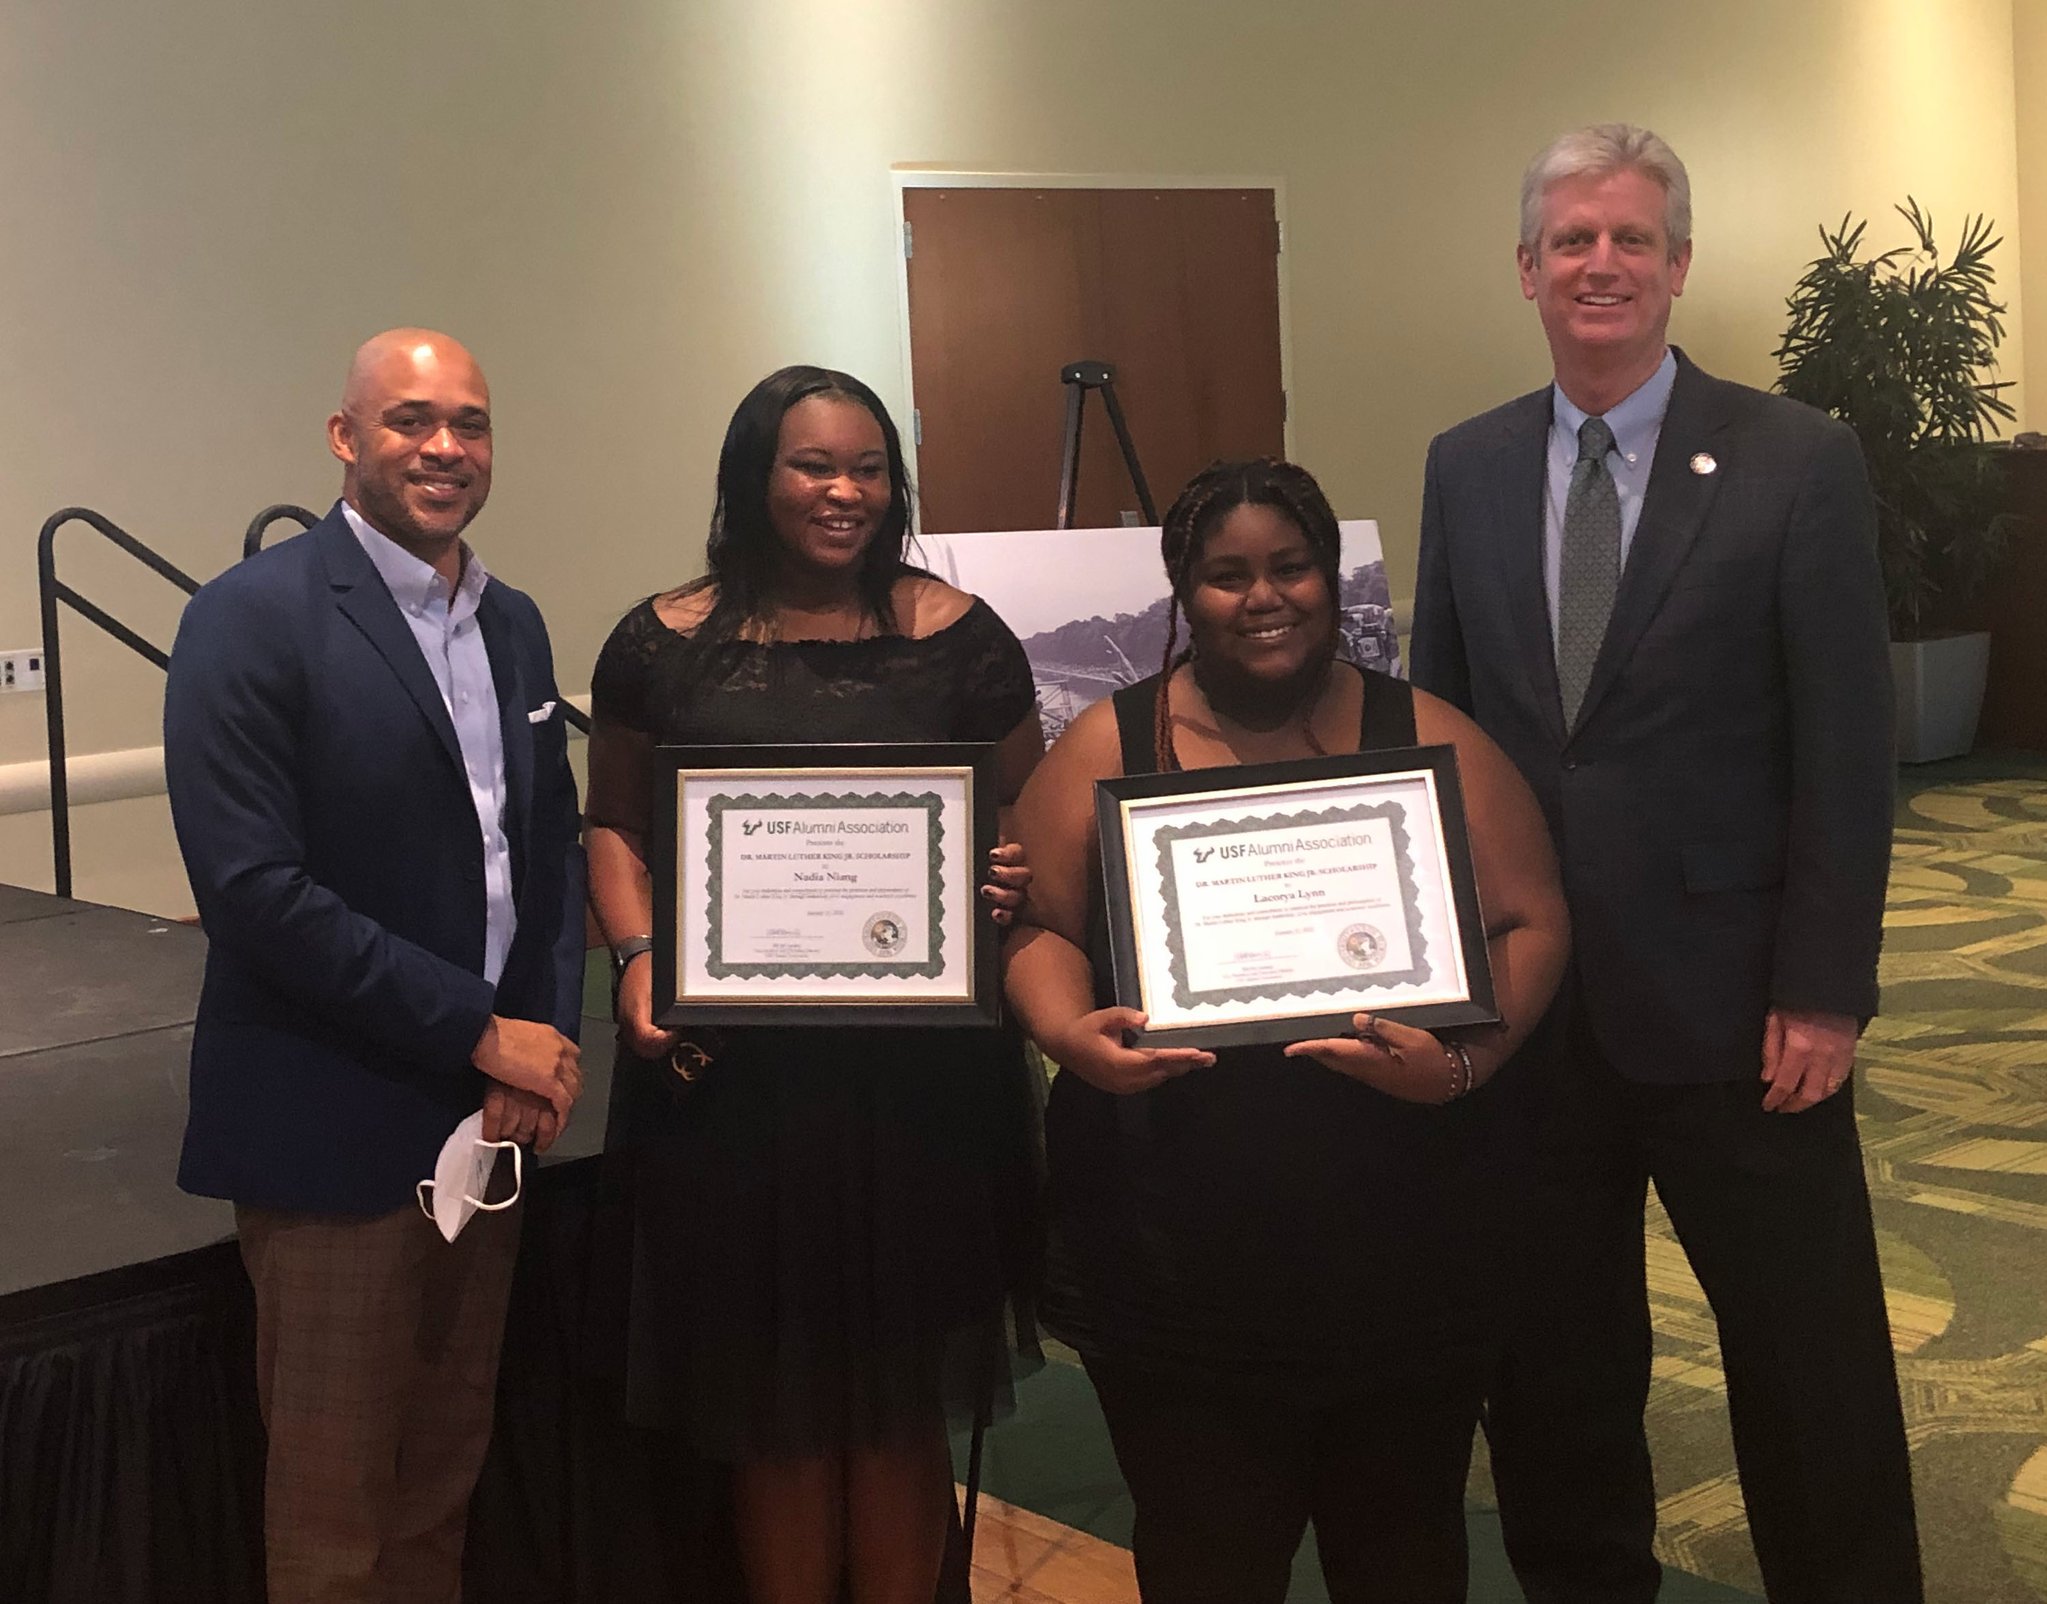 Change for the community: Nadia Niang and Lacorya Lynn exemplify success through volunteer work, advocacy